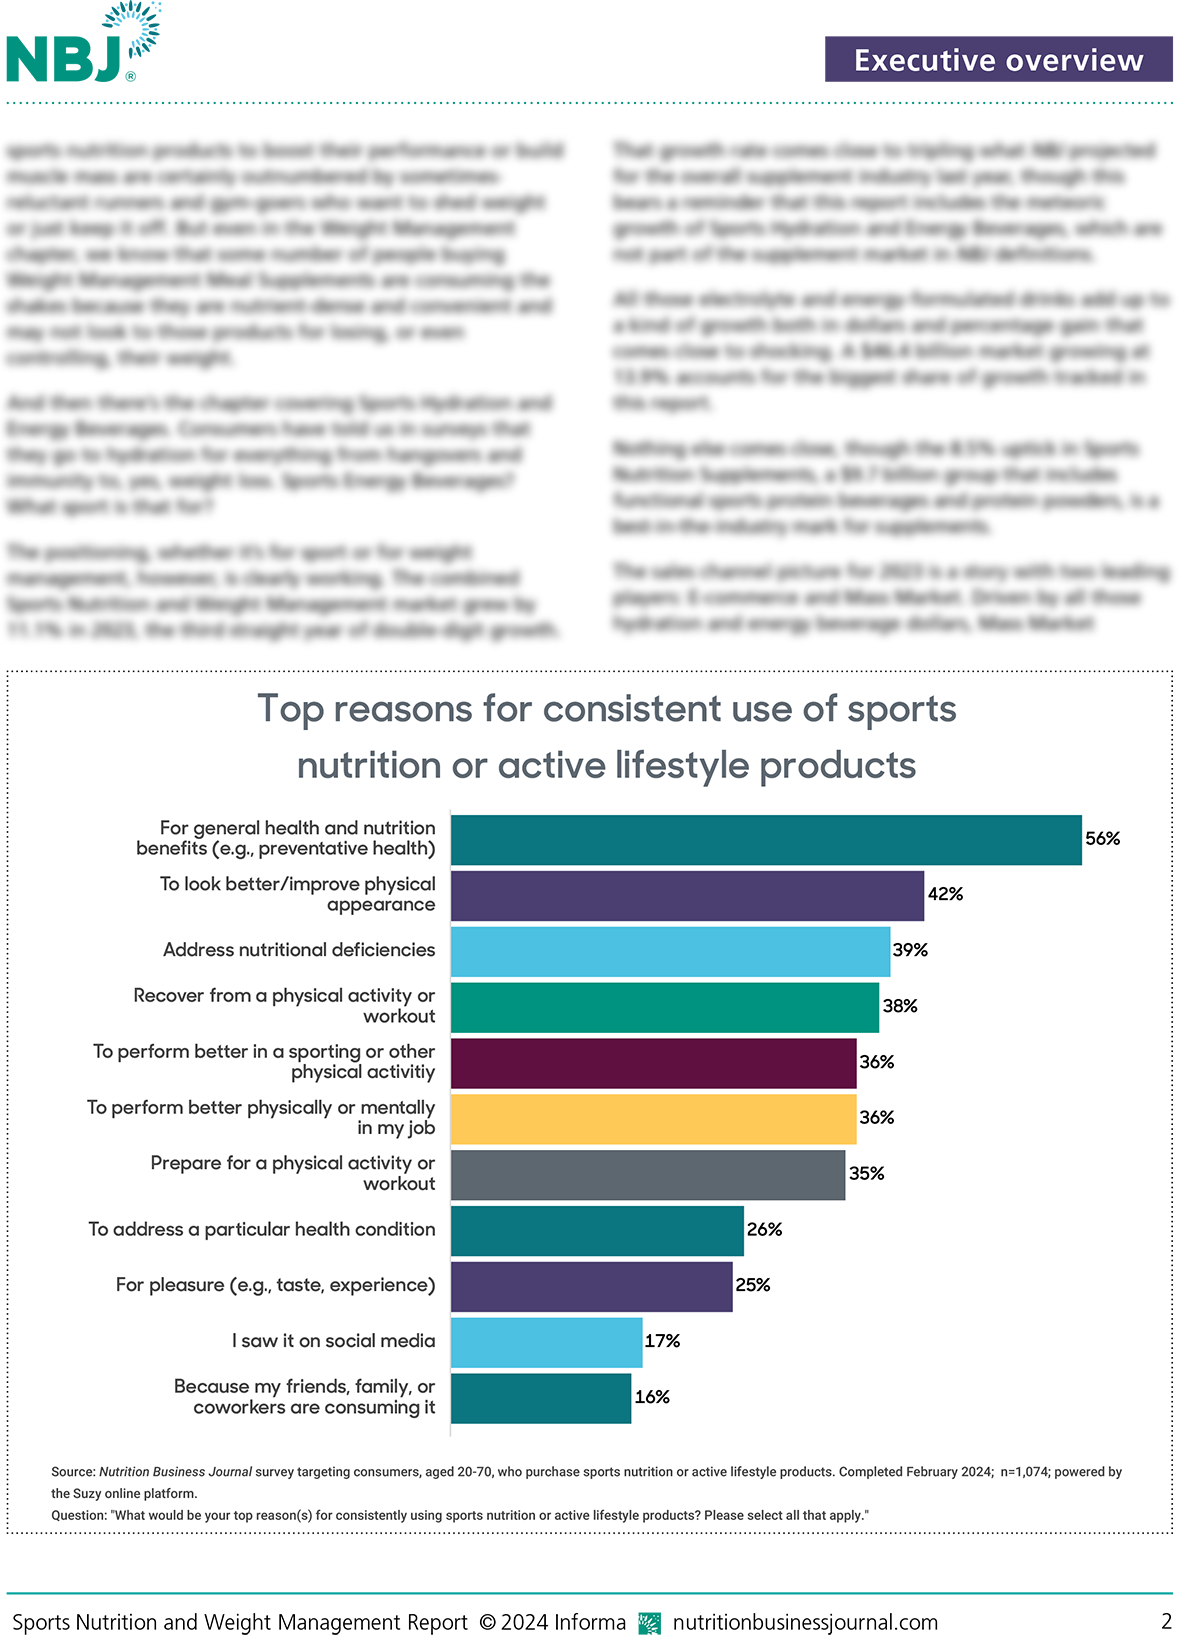 Sports Nutrition and Weight Management Report 2024